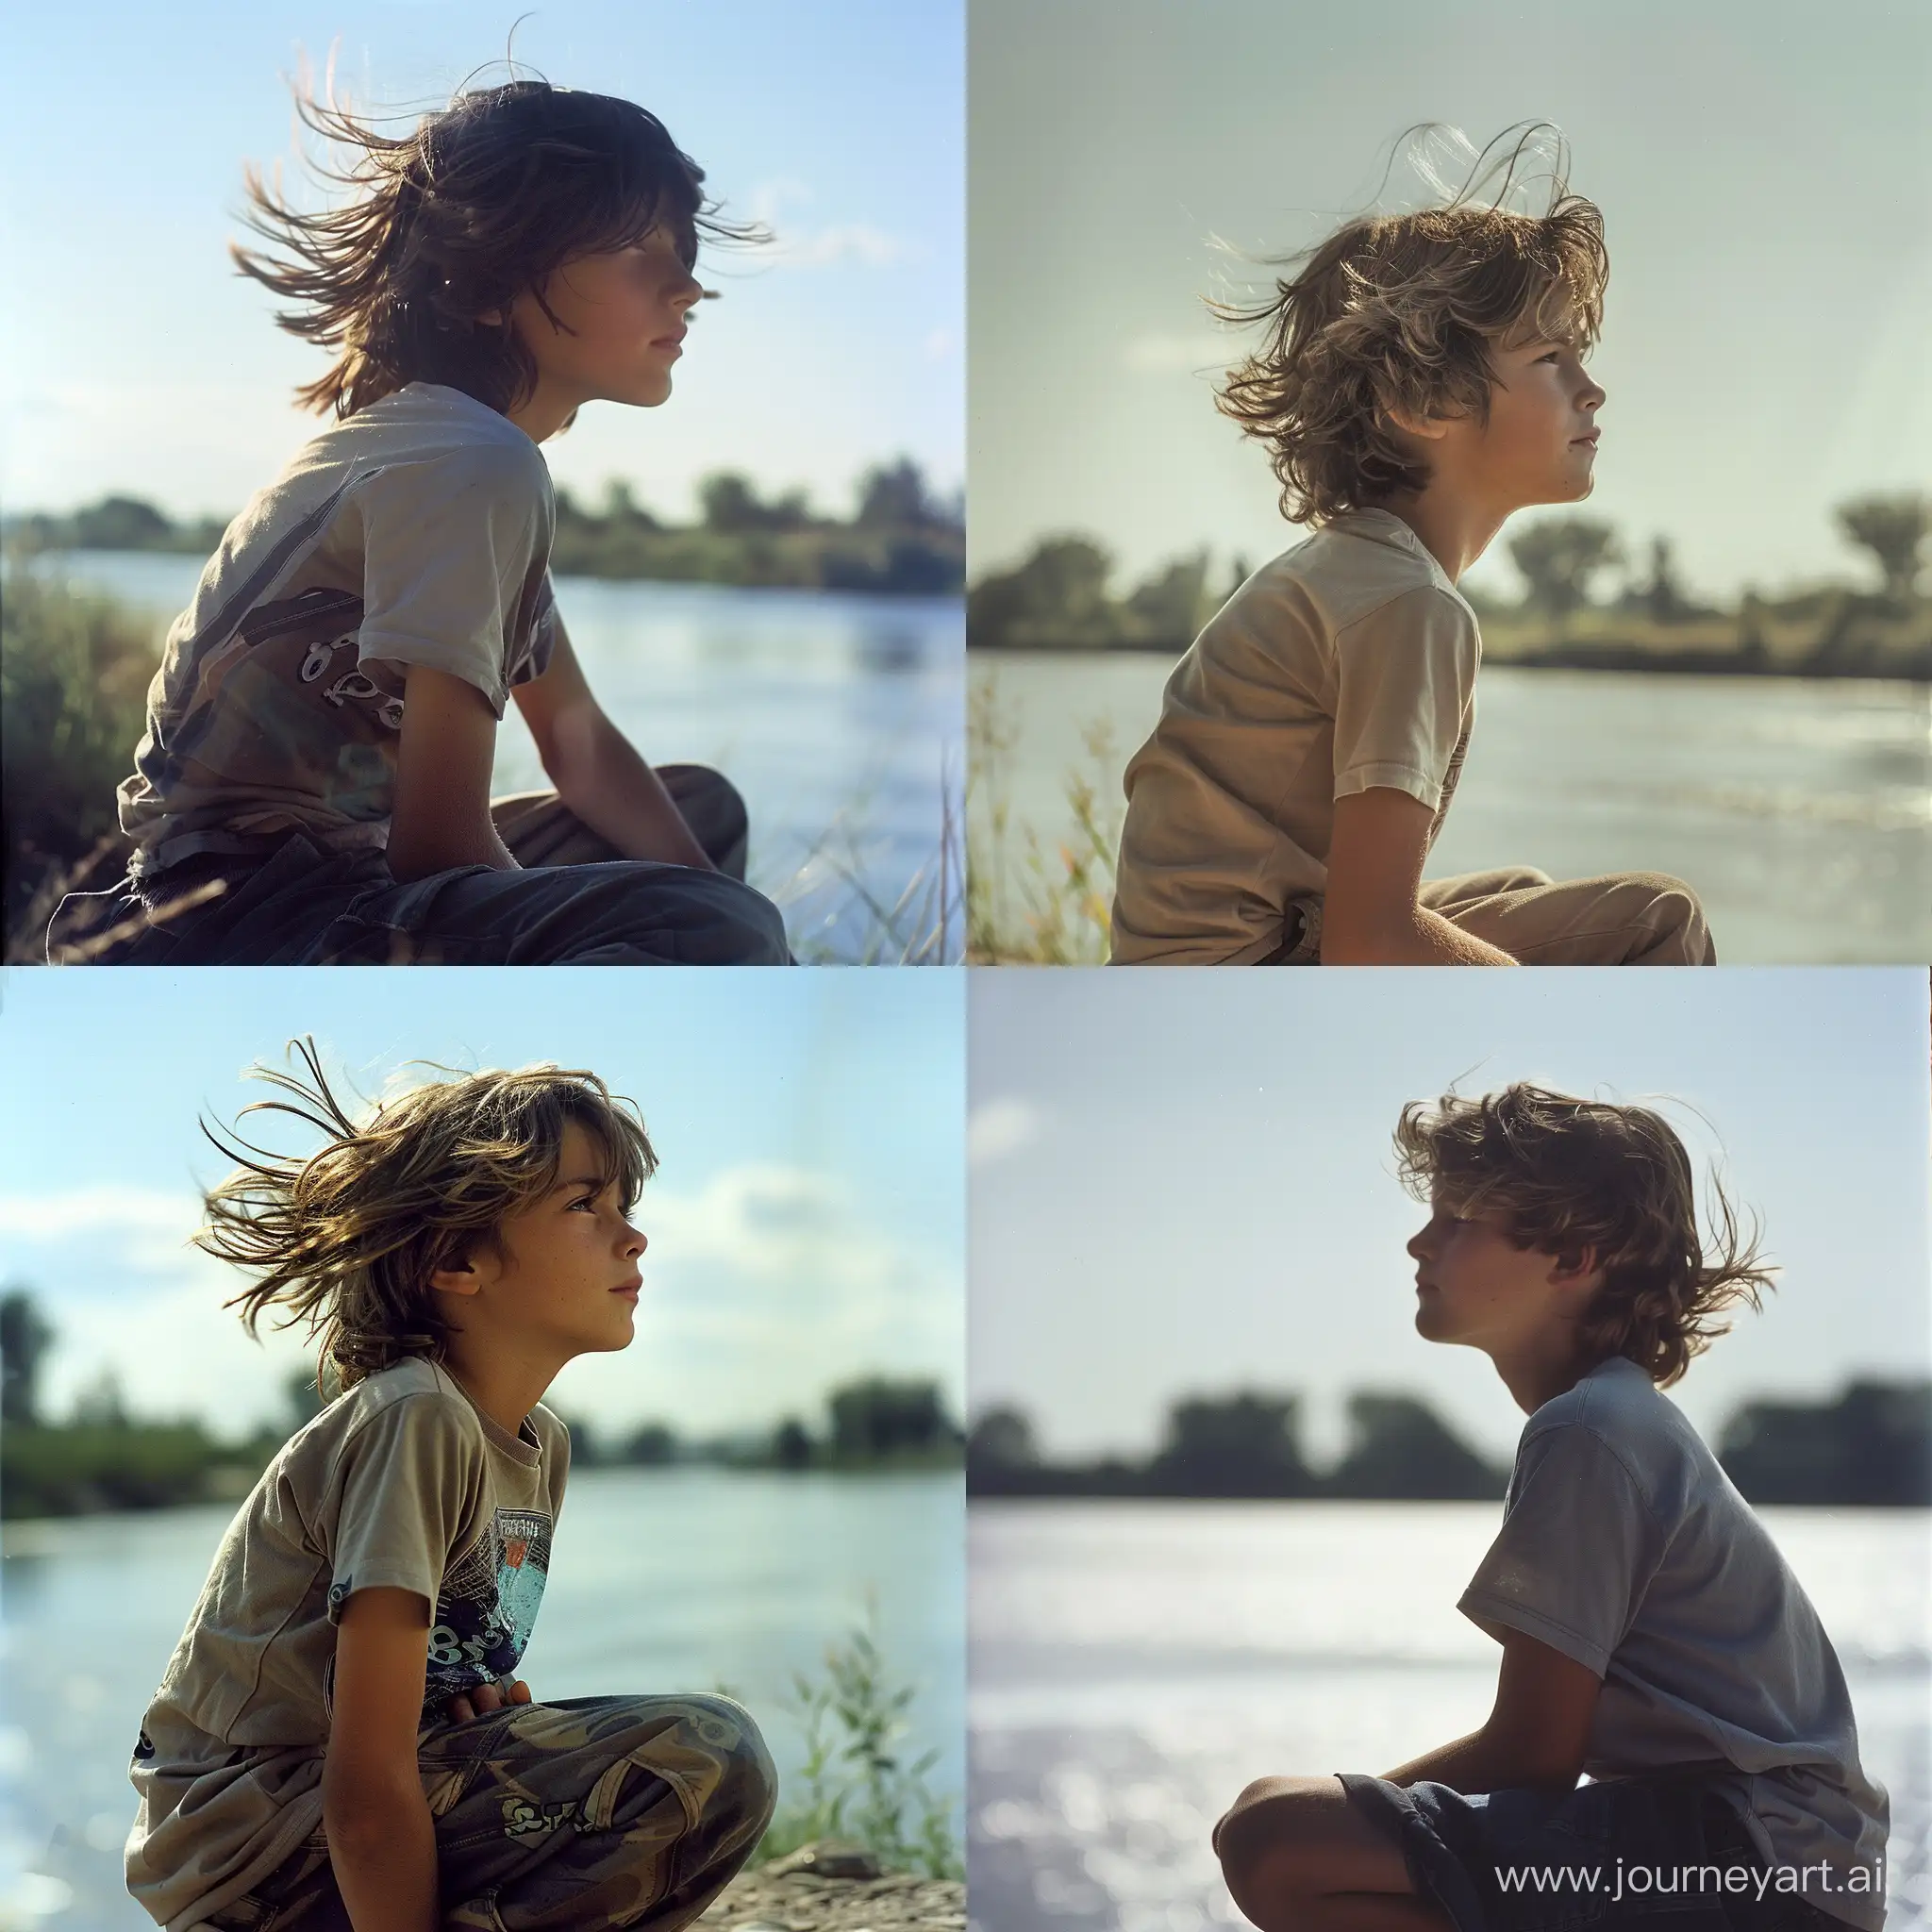 Adventurous-Boy-by-the-Riverside-Profile-of-a-12YearOld-Enjoying-a-Bright-Day